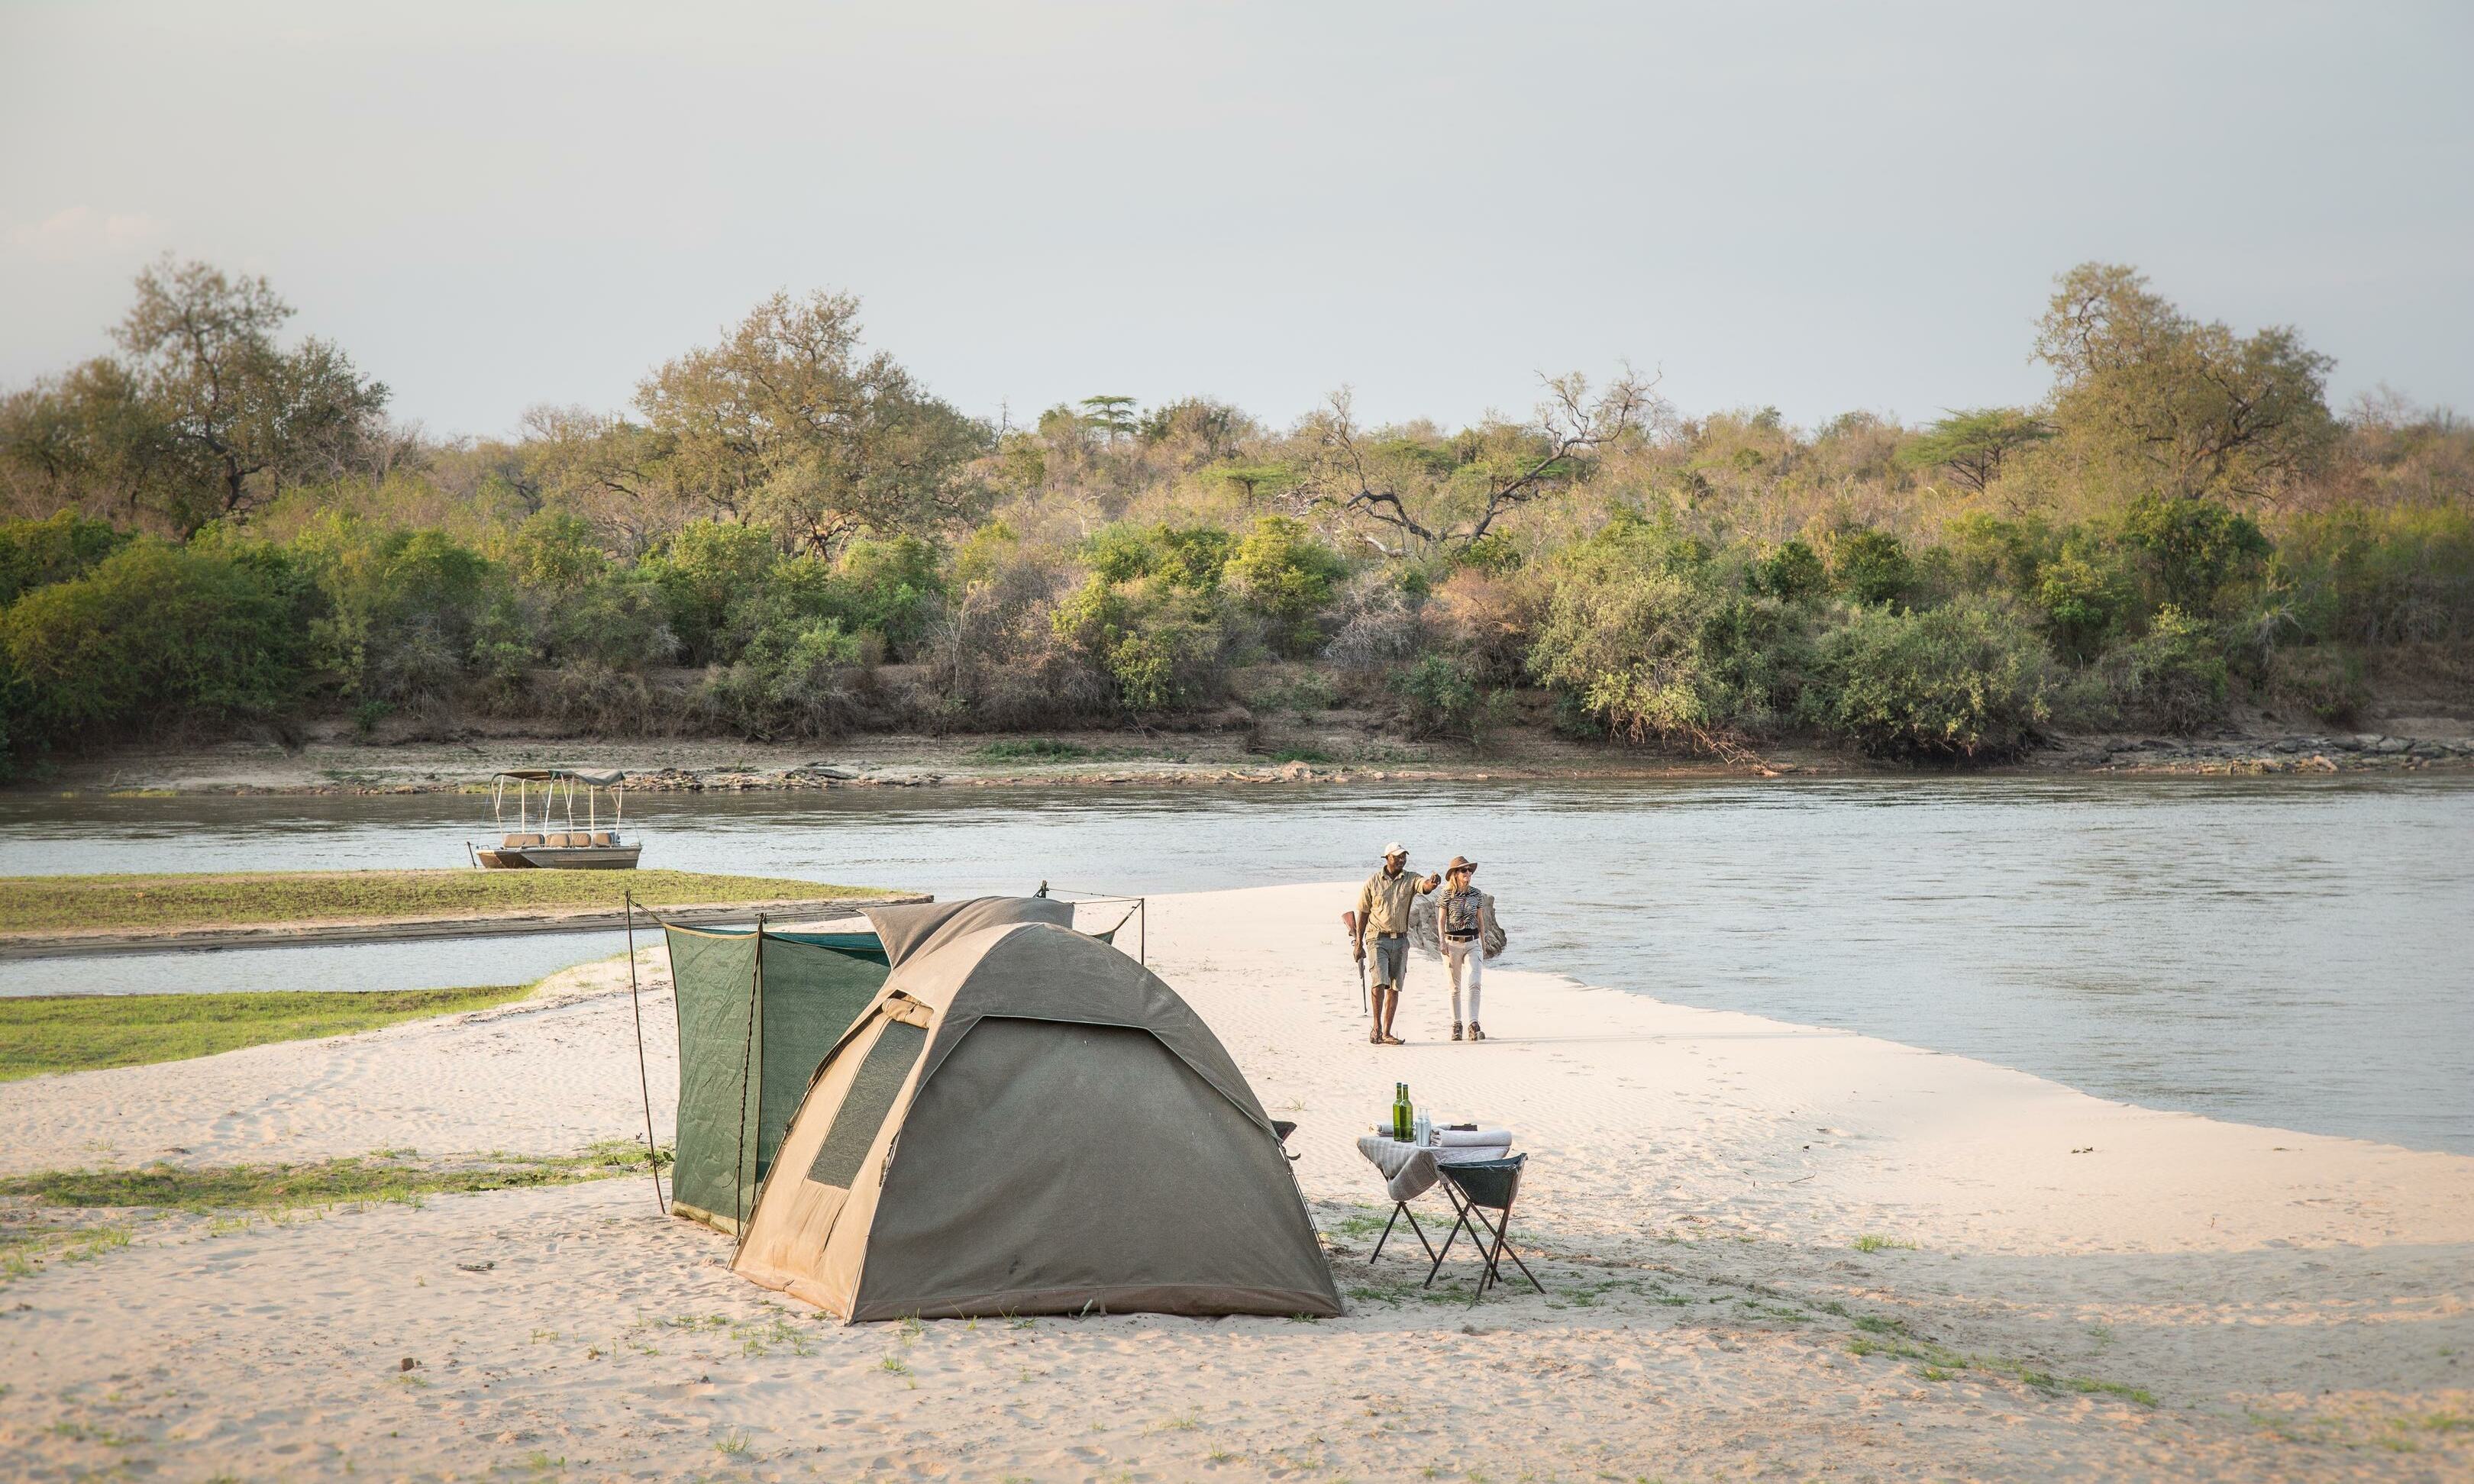 Sand River Selous Fly Camping experience Tanzania